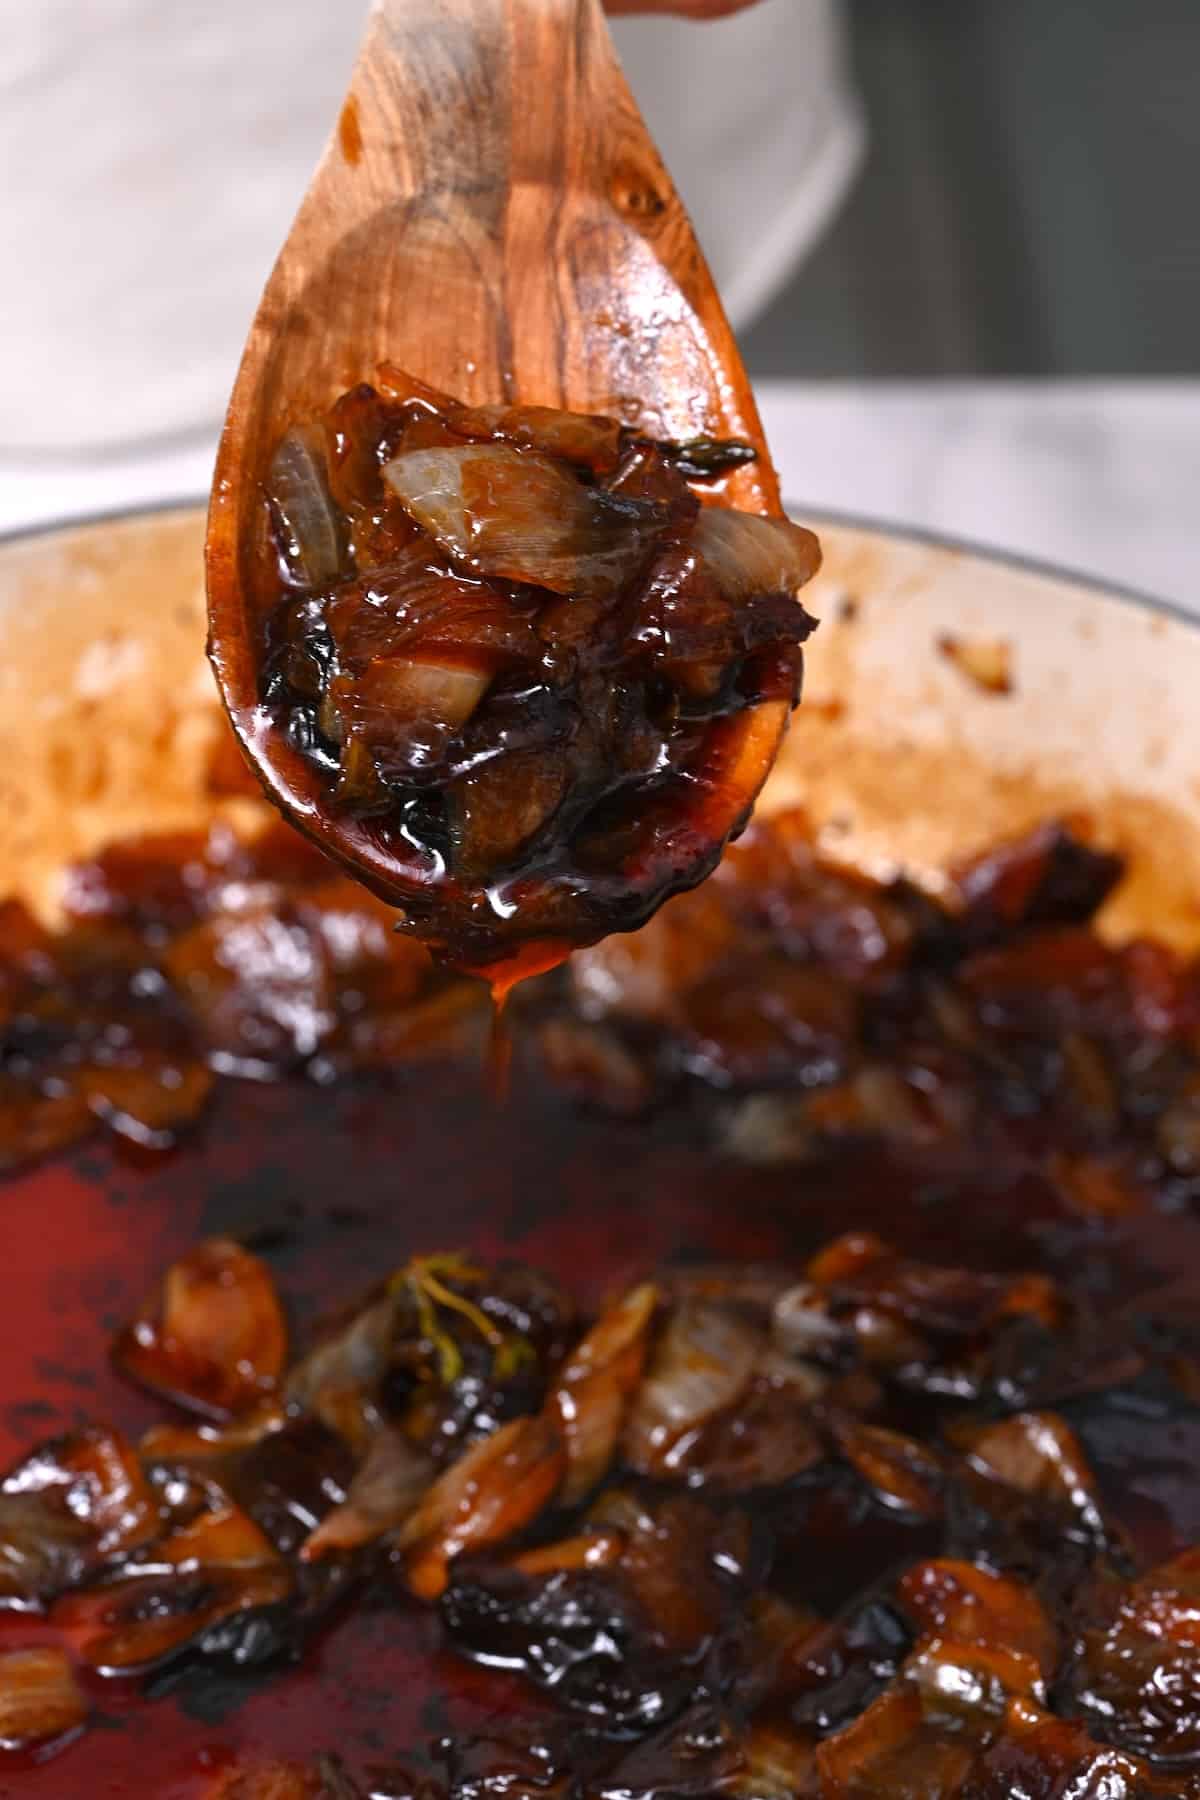 A spoonful of homemade onion jam